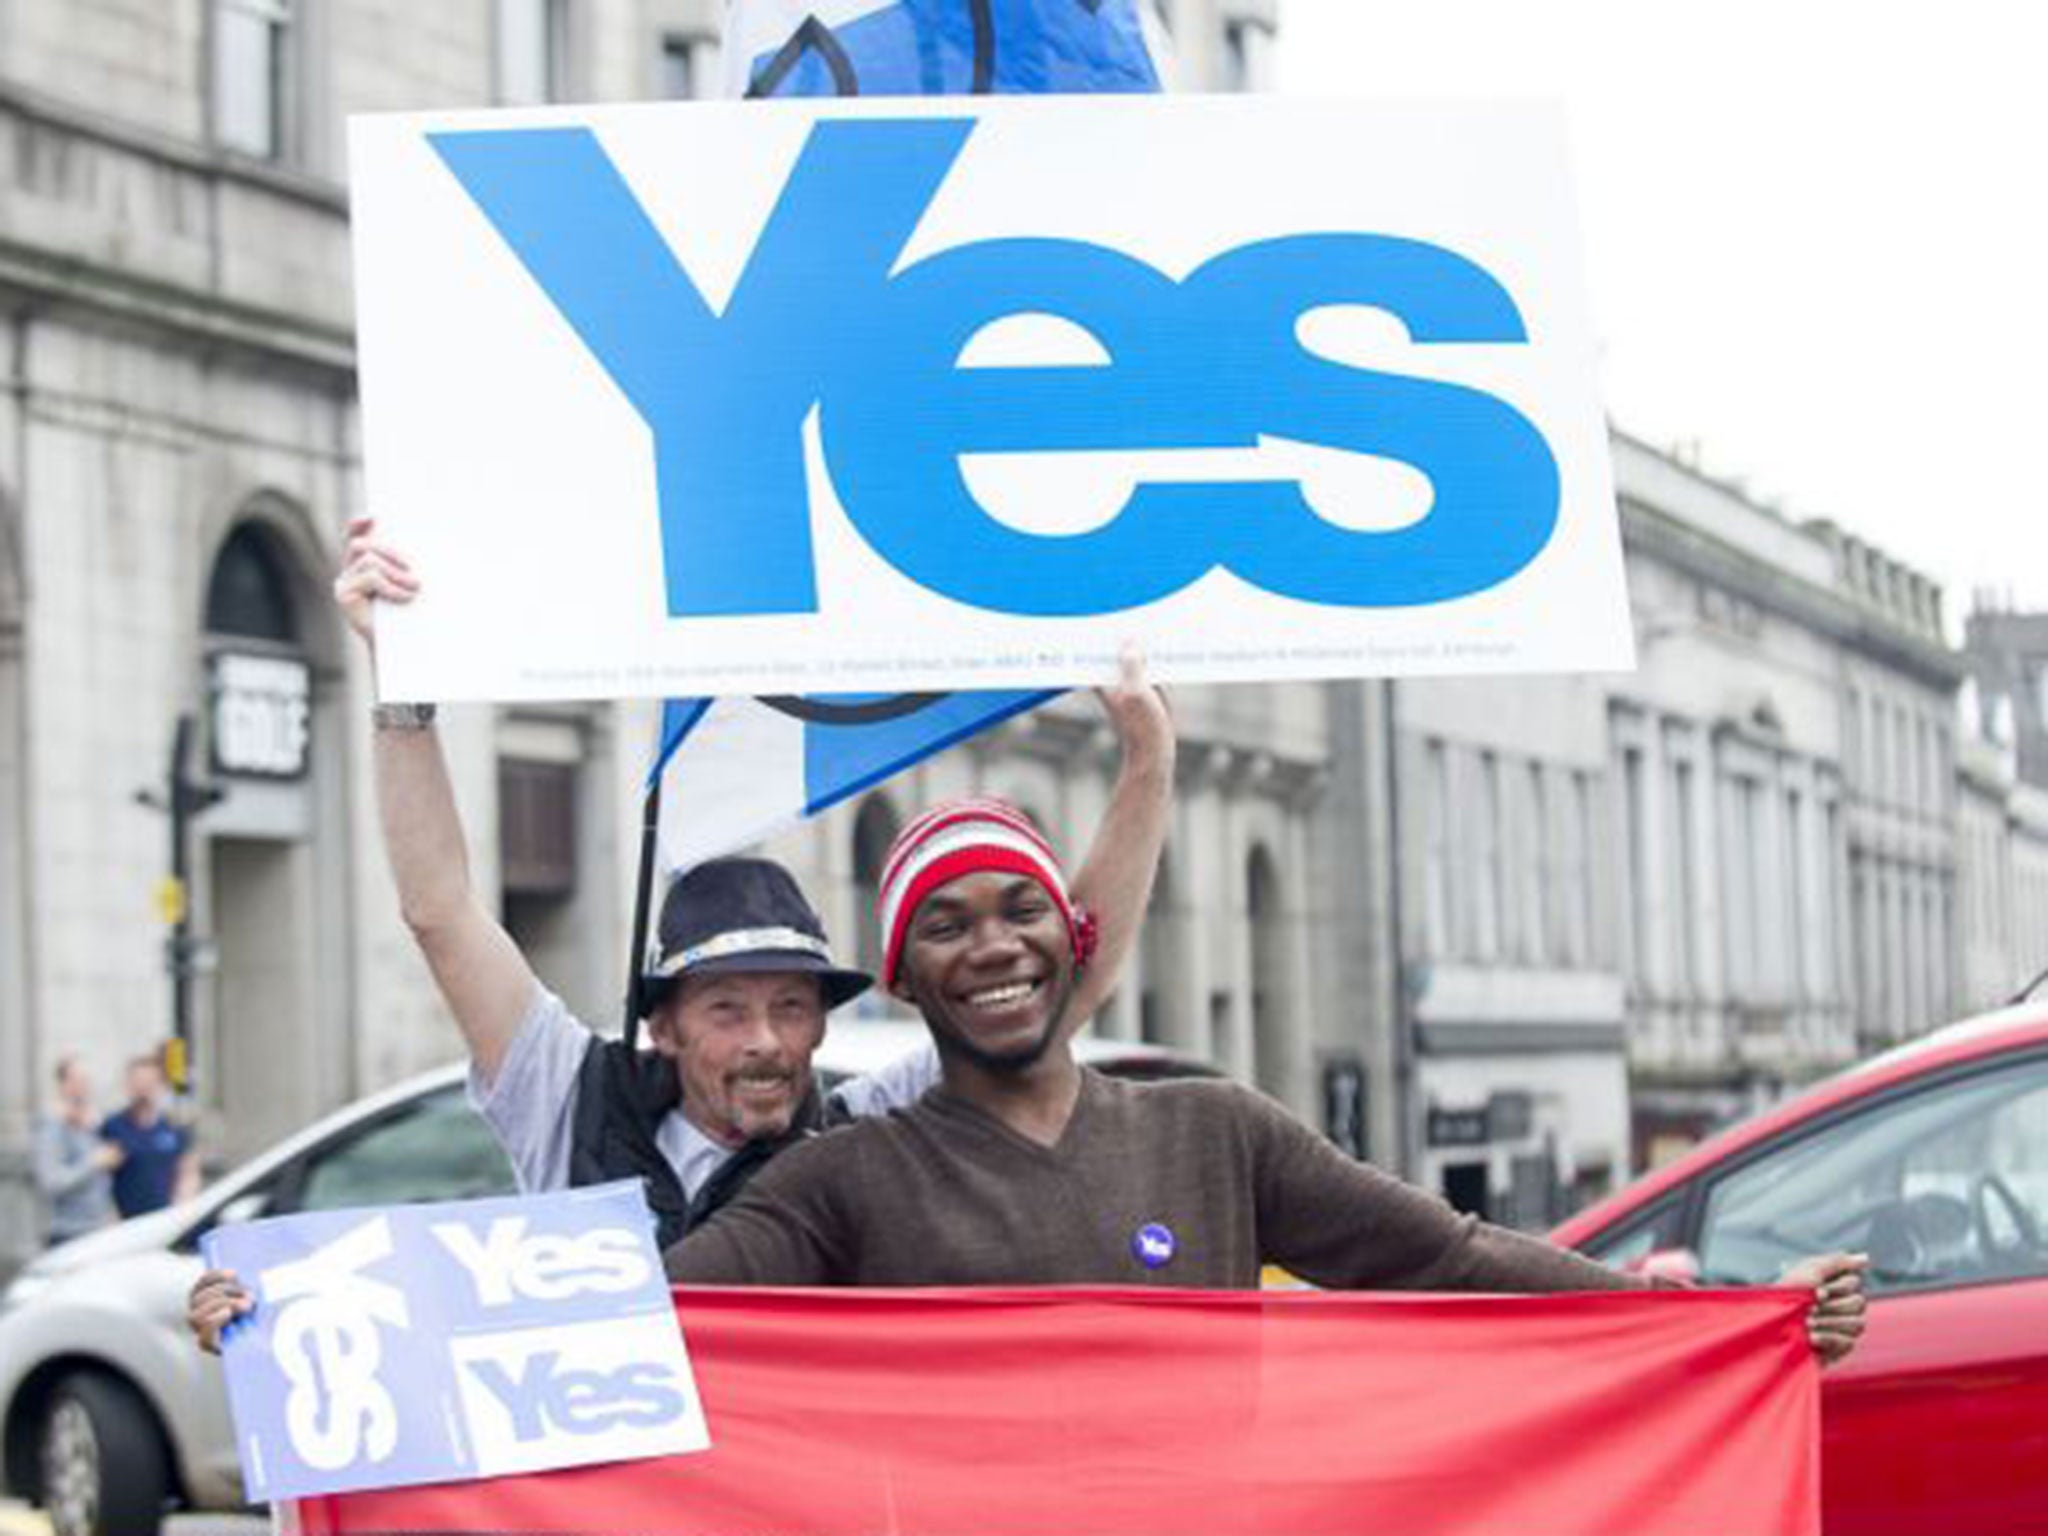 Street campaigners in Aberdeen rallying for the Scottish Referendum Vote